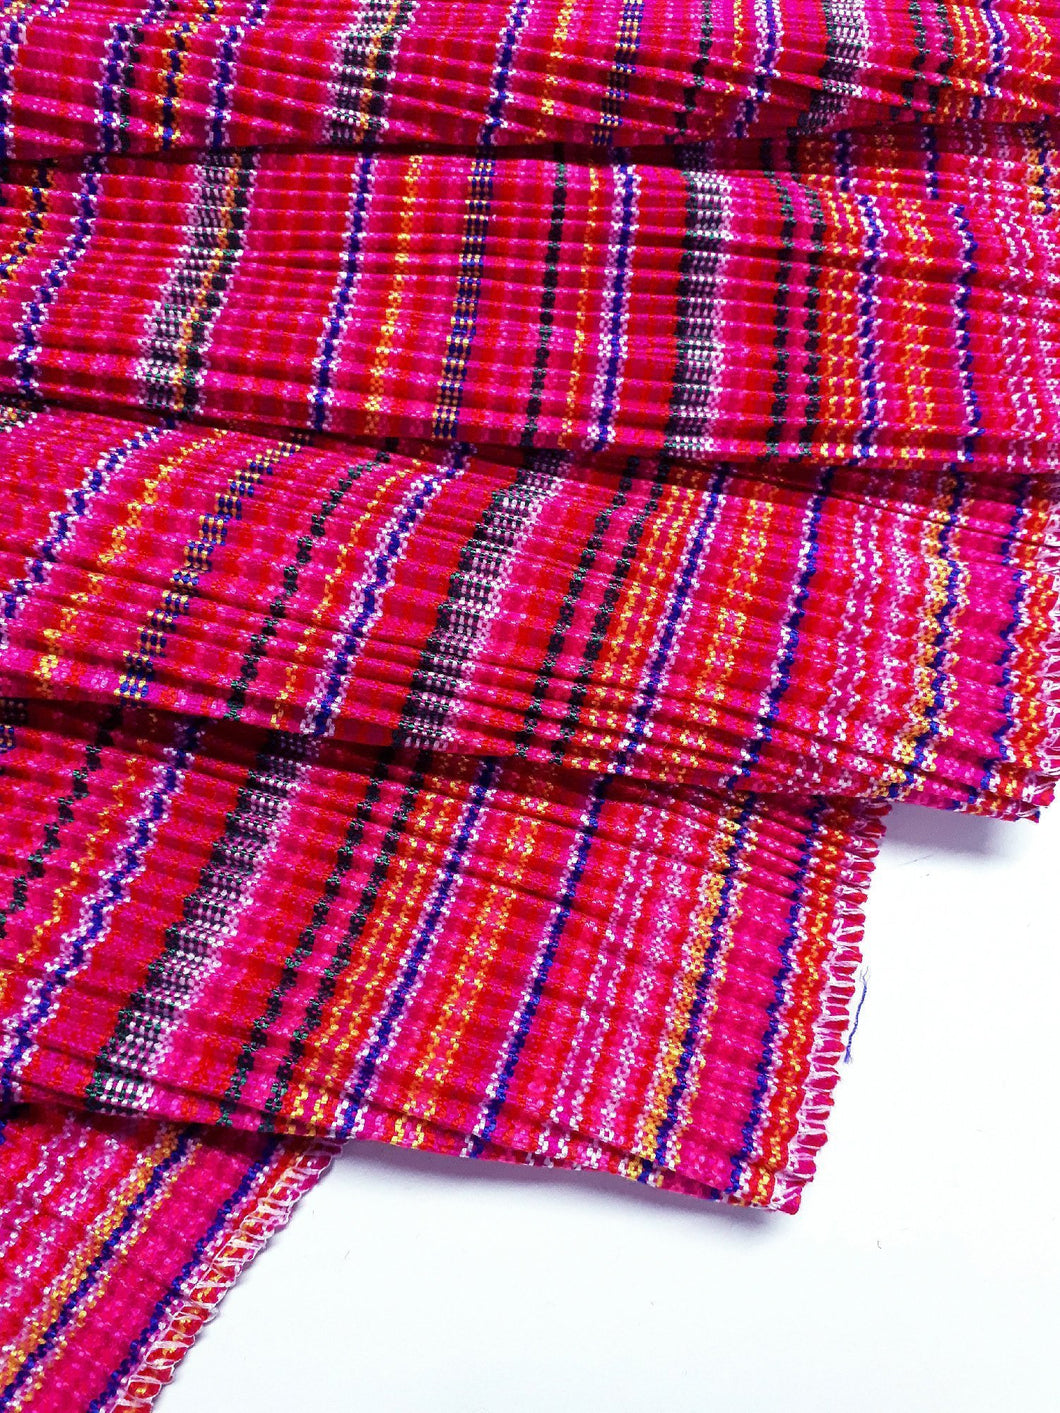 Hmong Fabric Colorful Pleat Fabric Fabric by the yard Hill Tribe Fabric Craft Supplies Woven Textile Vintage Cotton Tribal Fabric 1/2 yard Pink HP1